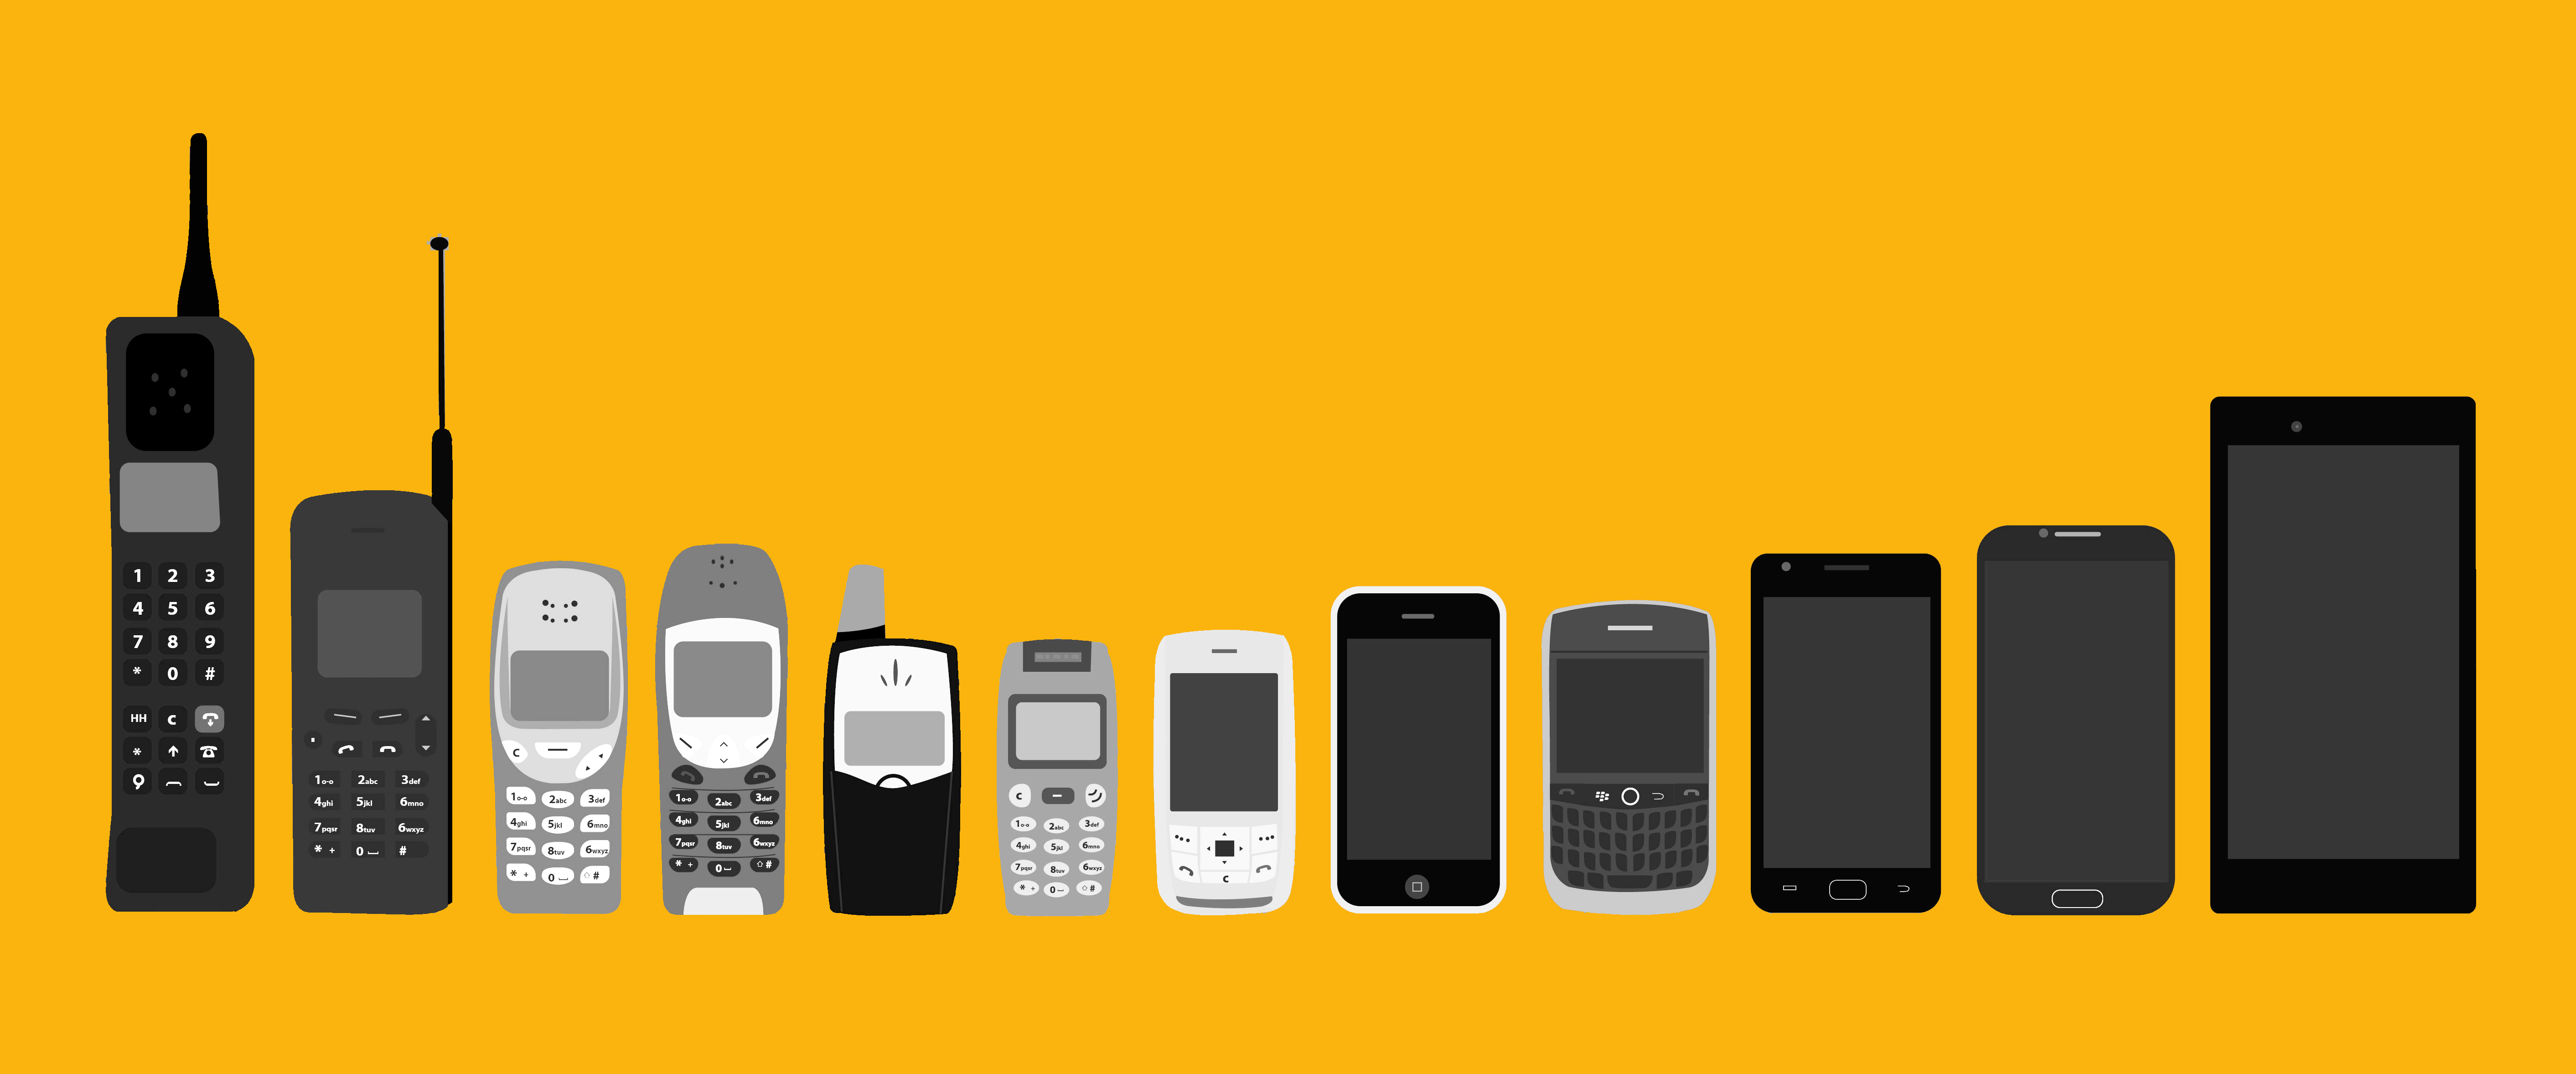 Evolution-of-the-Mobile-Display.png